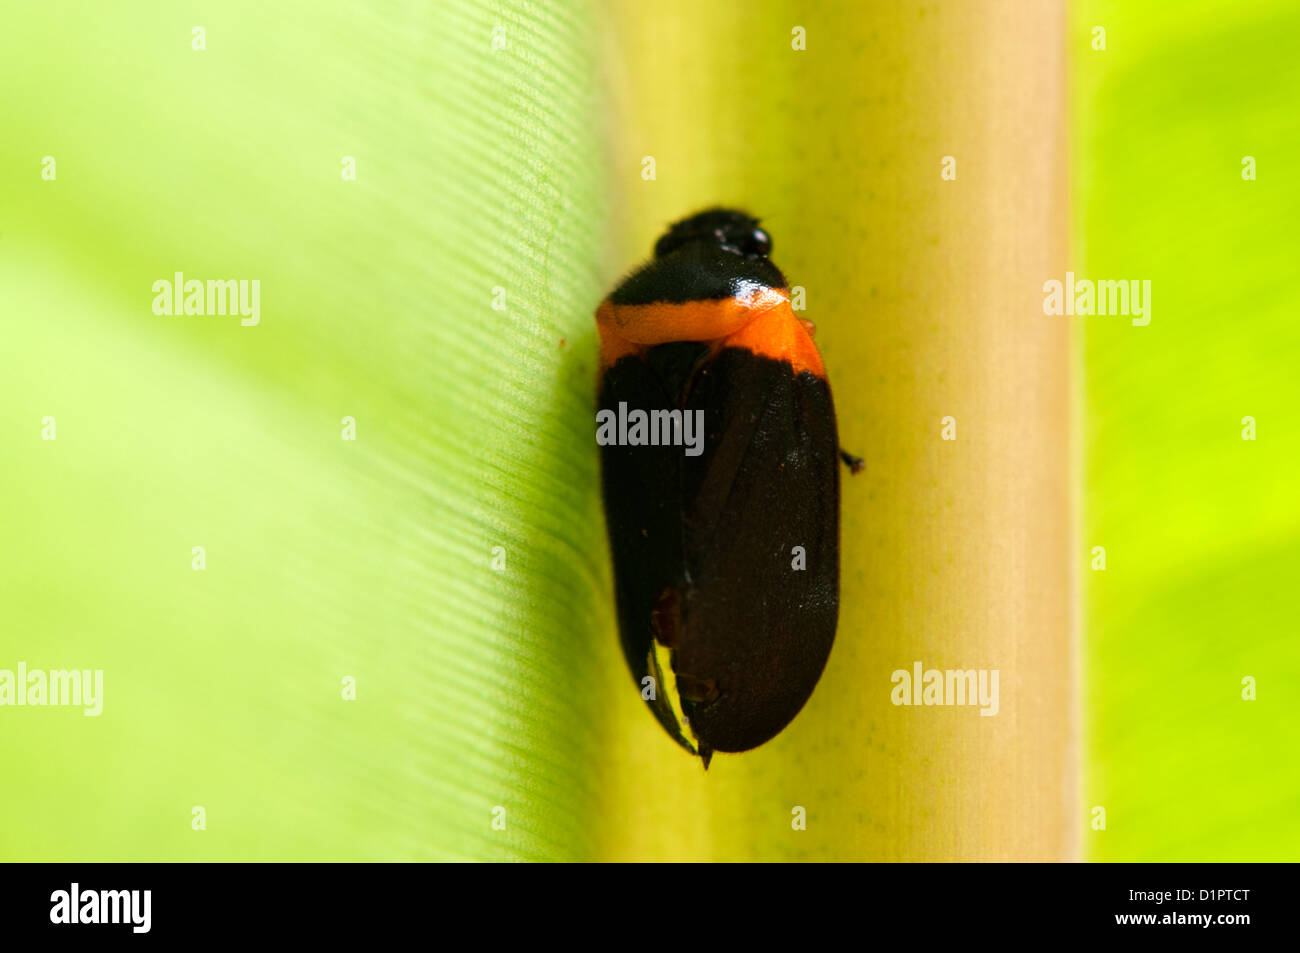 Insect on banana leaf Stock Photo